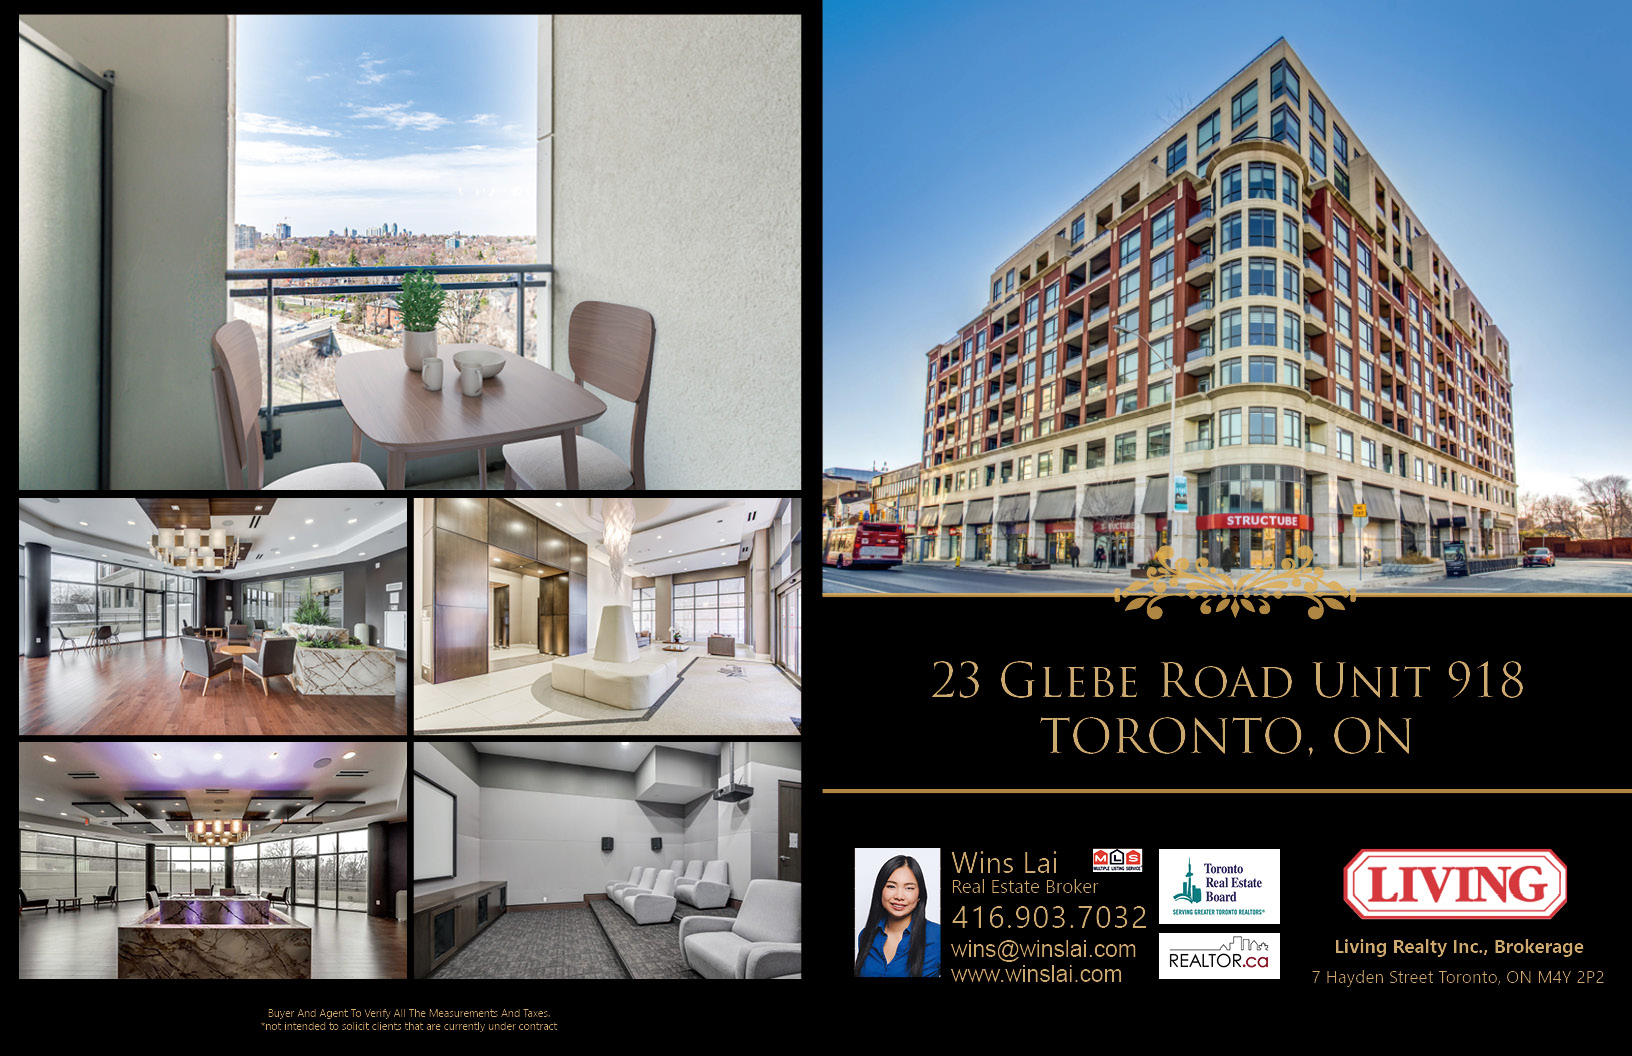 Marketing brochure showing several images of Allure Condos.